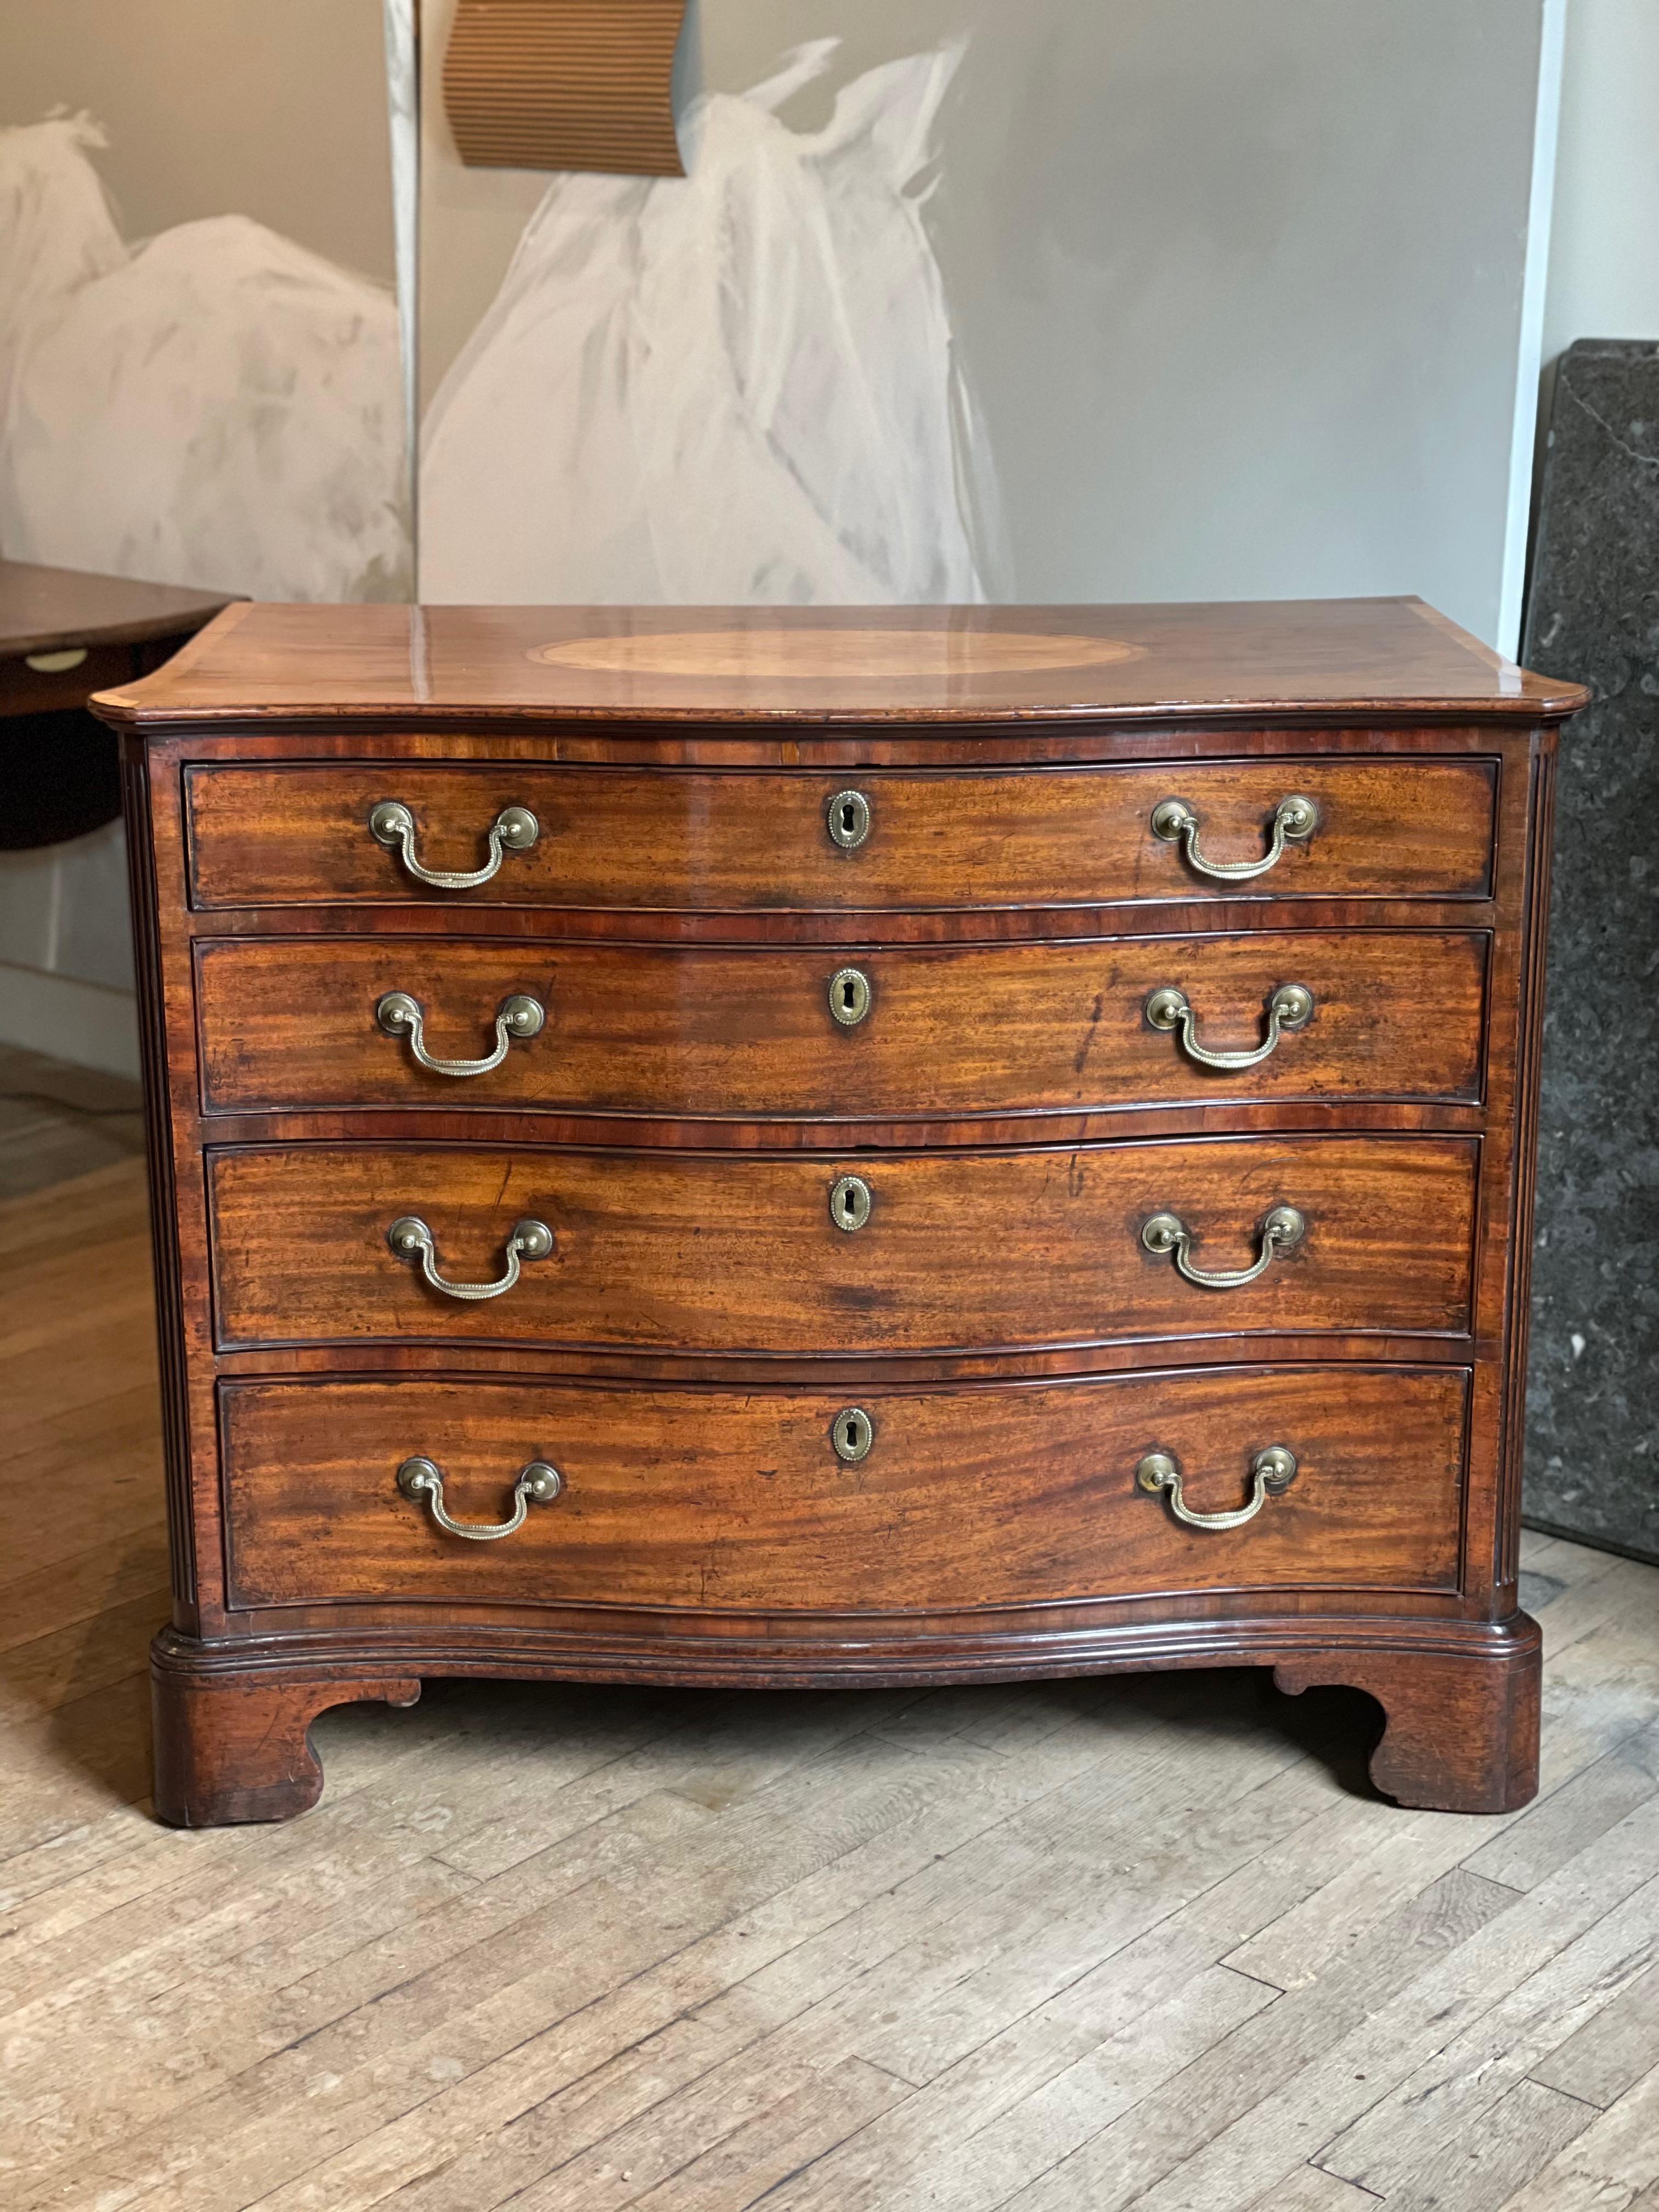 Chippendale satinwood & tulipwood inlaid mahogany serpentine chest of drawers
English, circa 1770
Measures: 33 x 41 x 21 ½ inches

[2257].